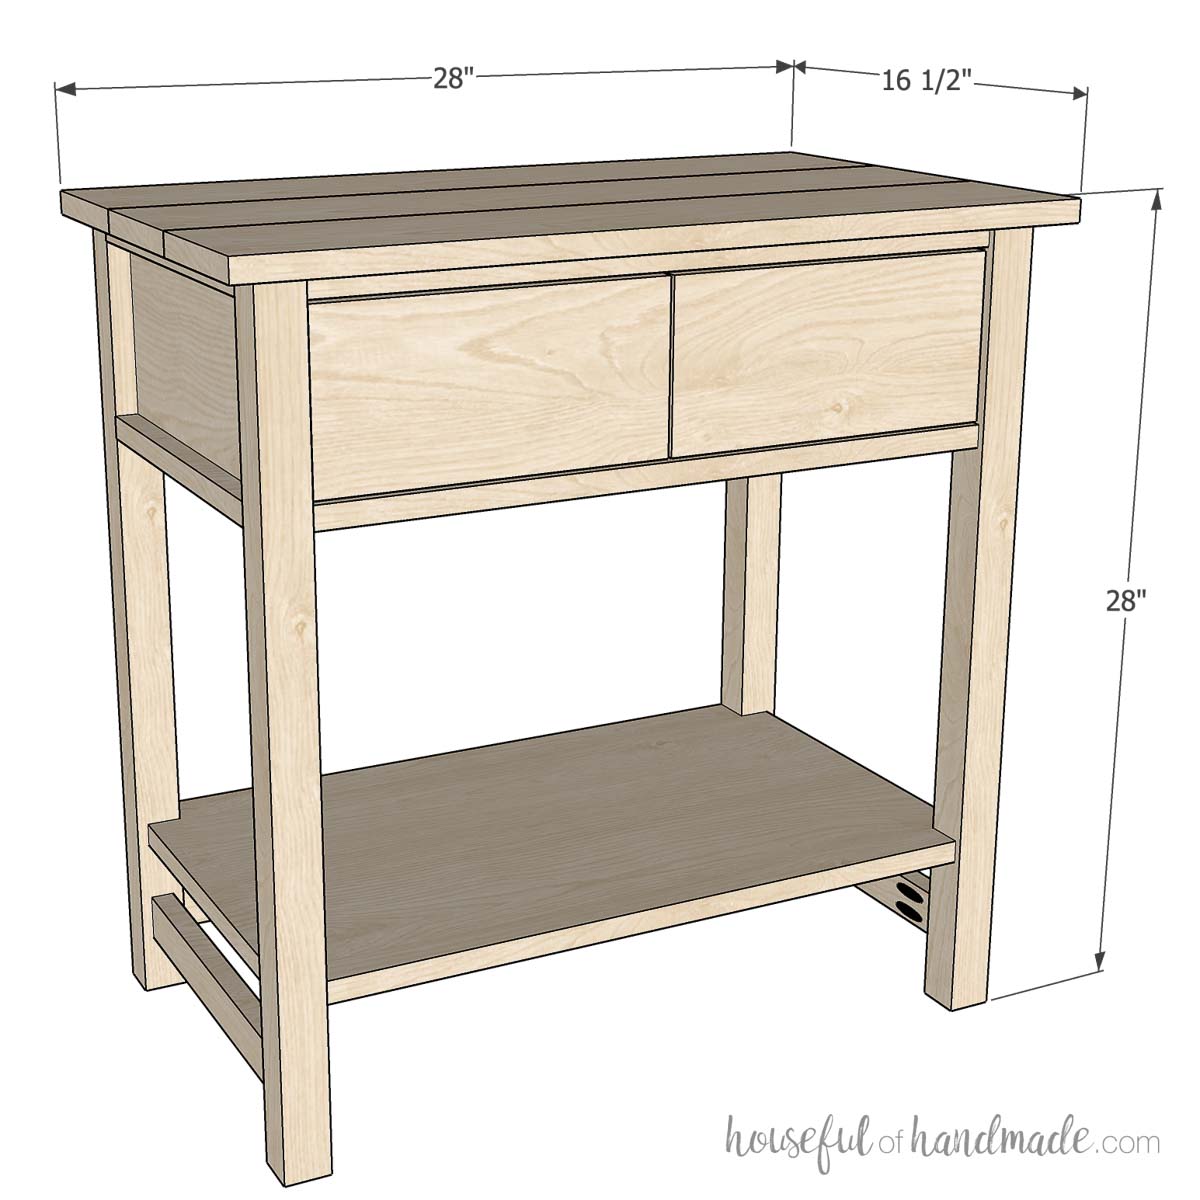 3D sketch of the nightstand with dimensions noted. 